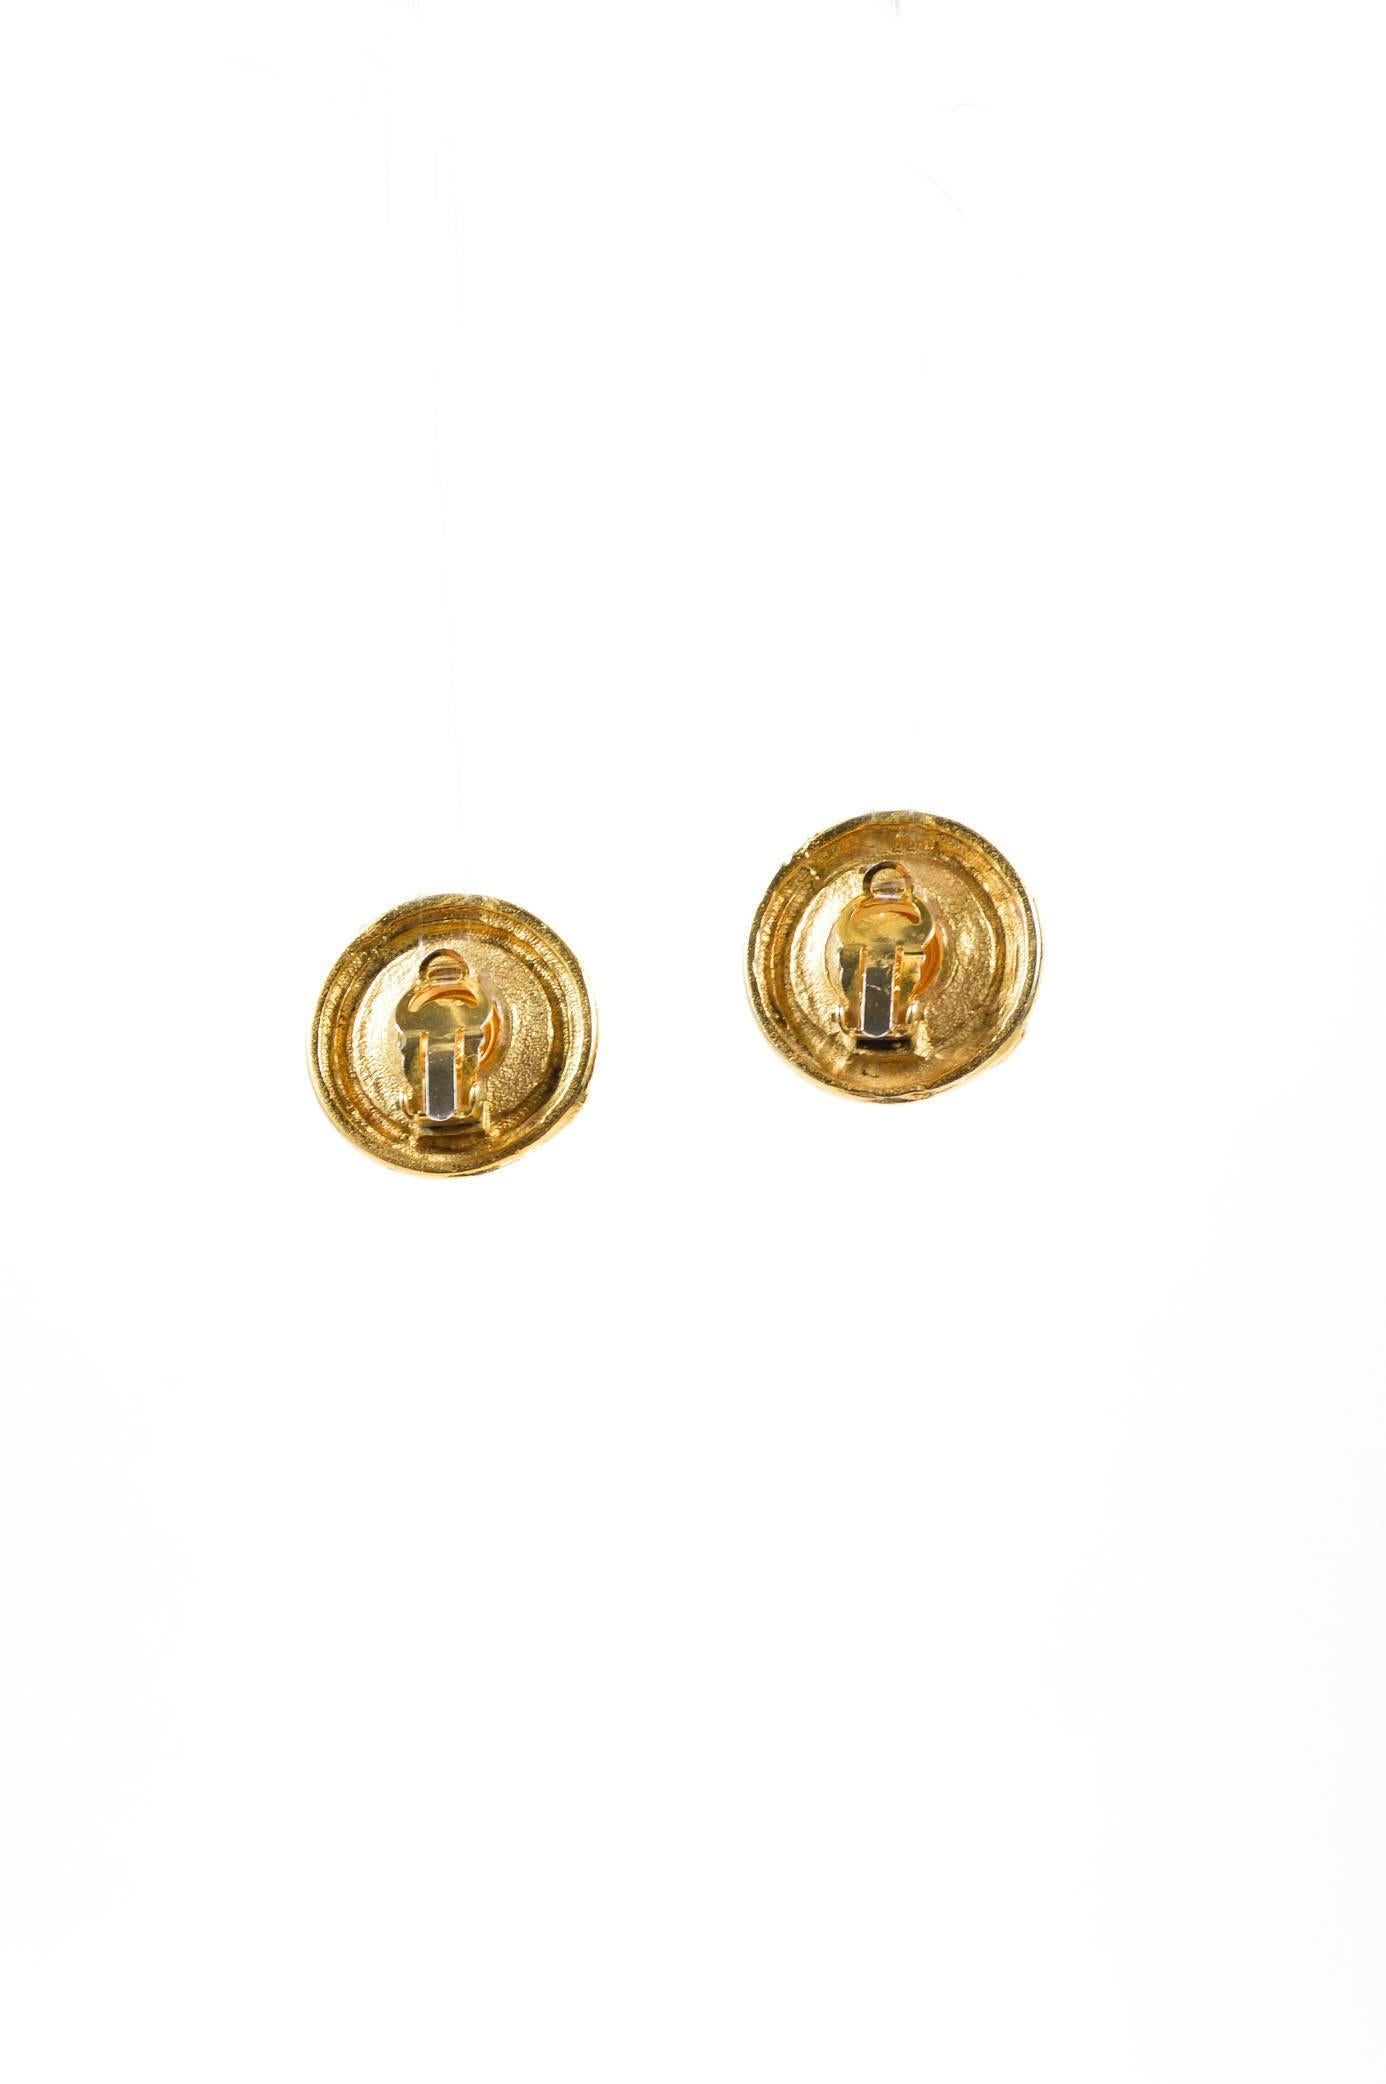 Bright gold-tone circular earrings. Metal is textured to mimic the appearance of braidedrope.Round faux pearlcenter stones.Hinged clip fastening at backs. Flat ovaljewelry tag at backs of earrings read "'C' CHANEL 'R' 'CC' MADE IN